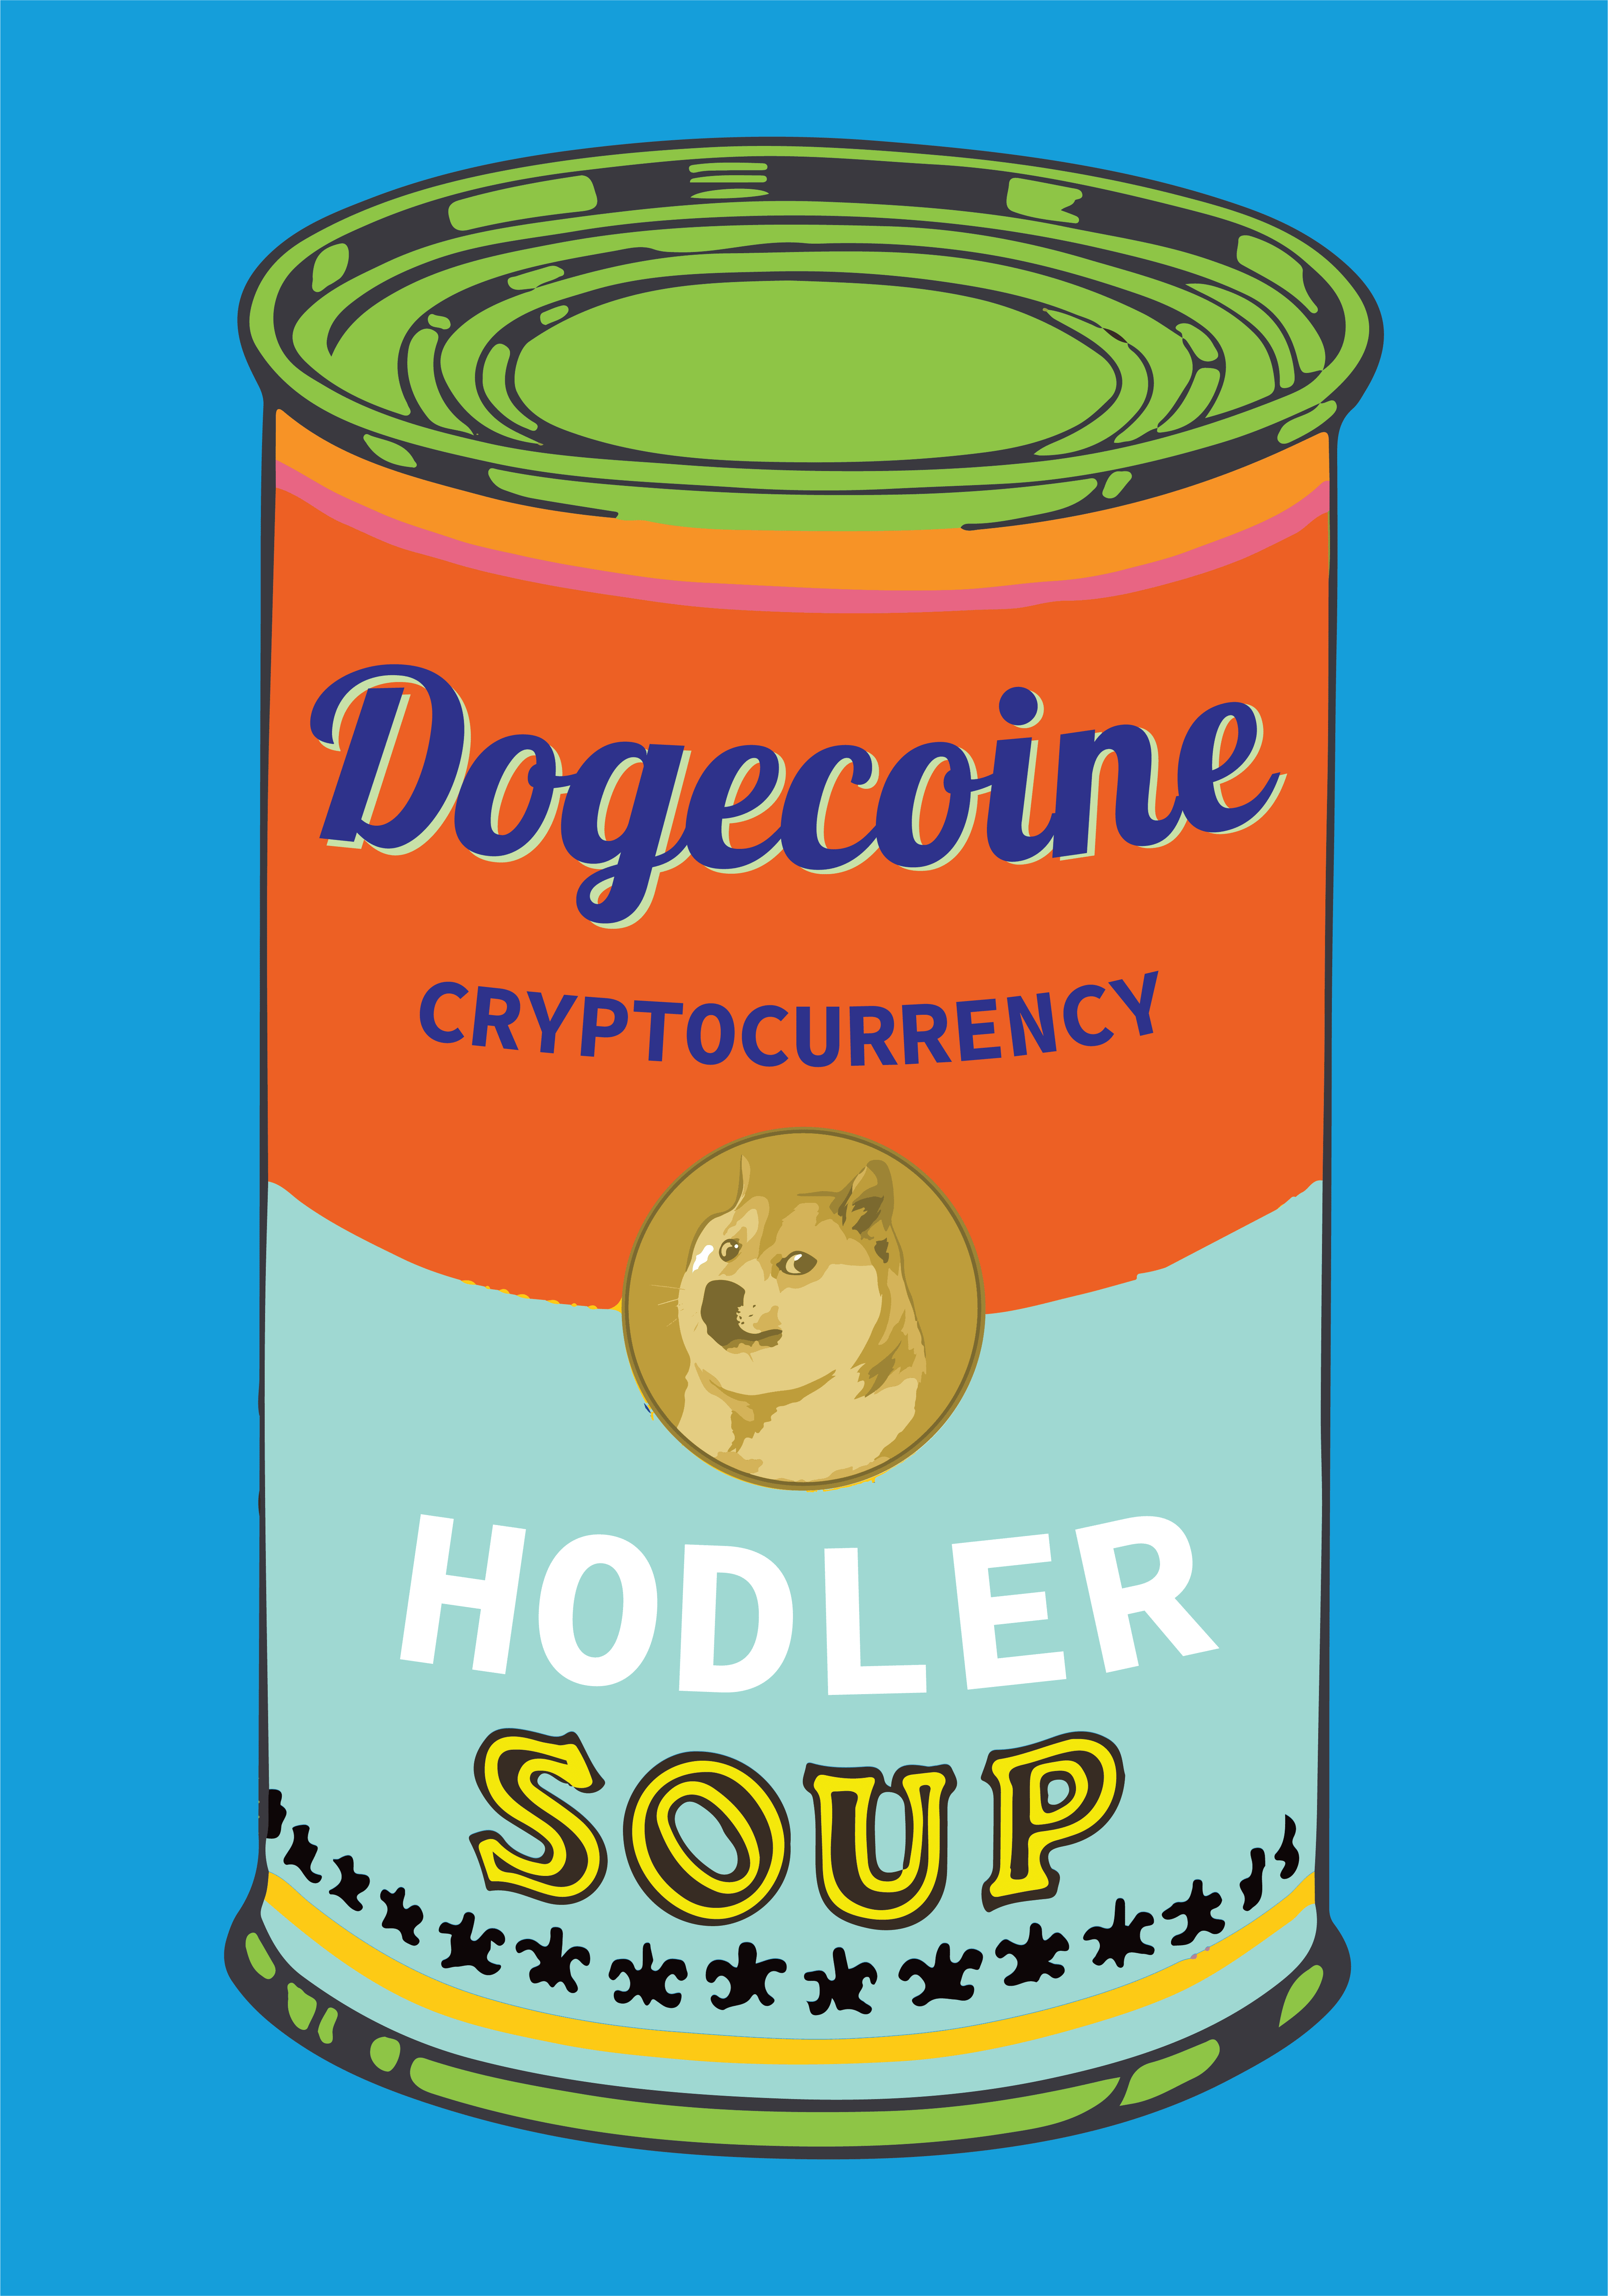 Campbell's dogecoin soup